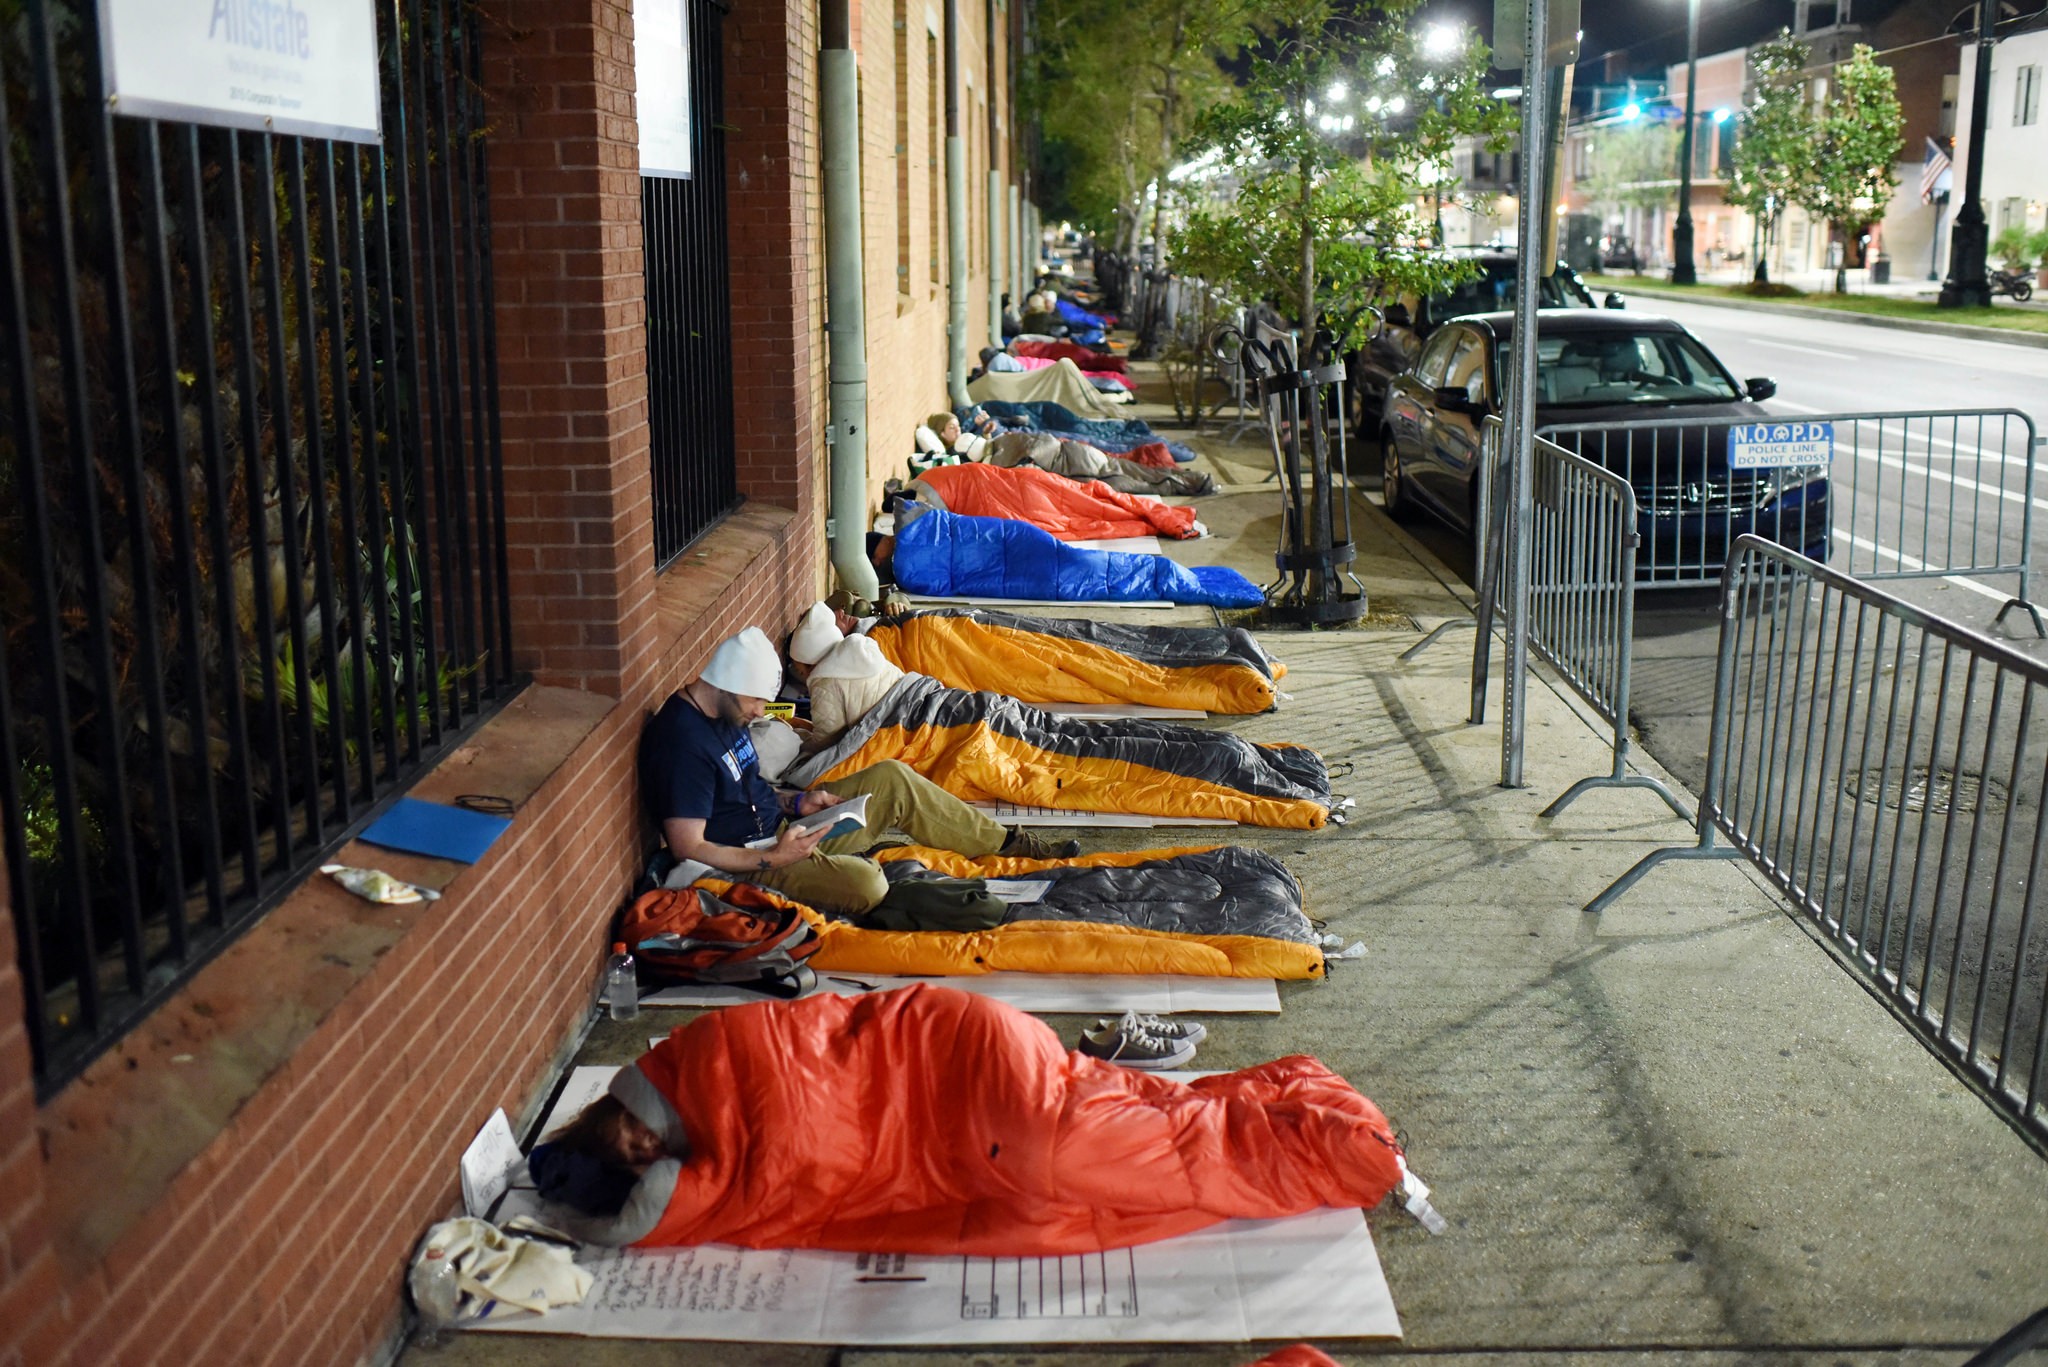 Happening Today: Sleep Out for youth homelessness, Clearwater's Festival of  Trees, 